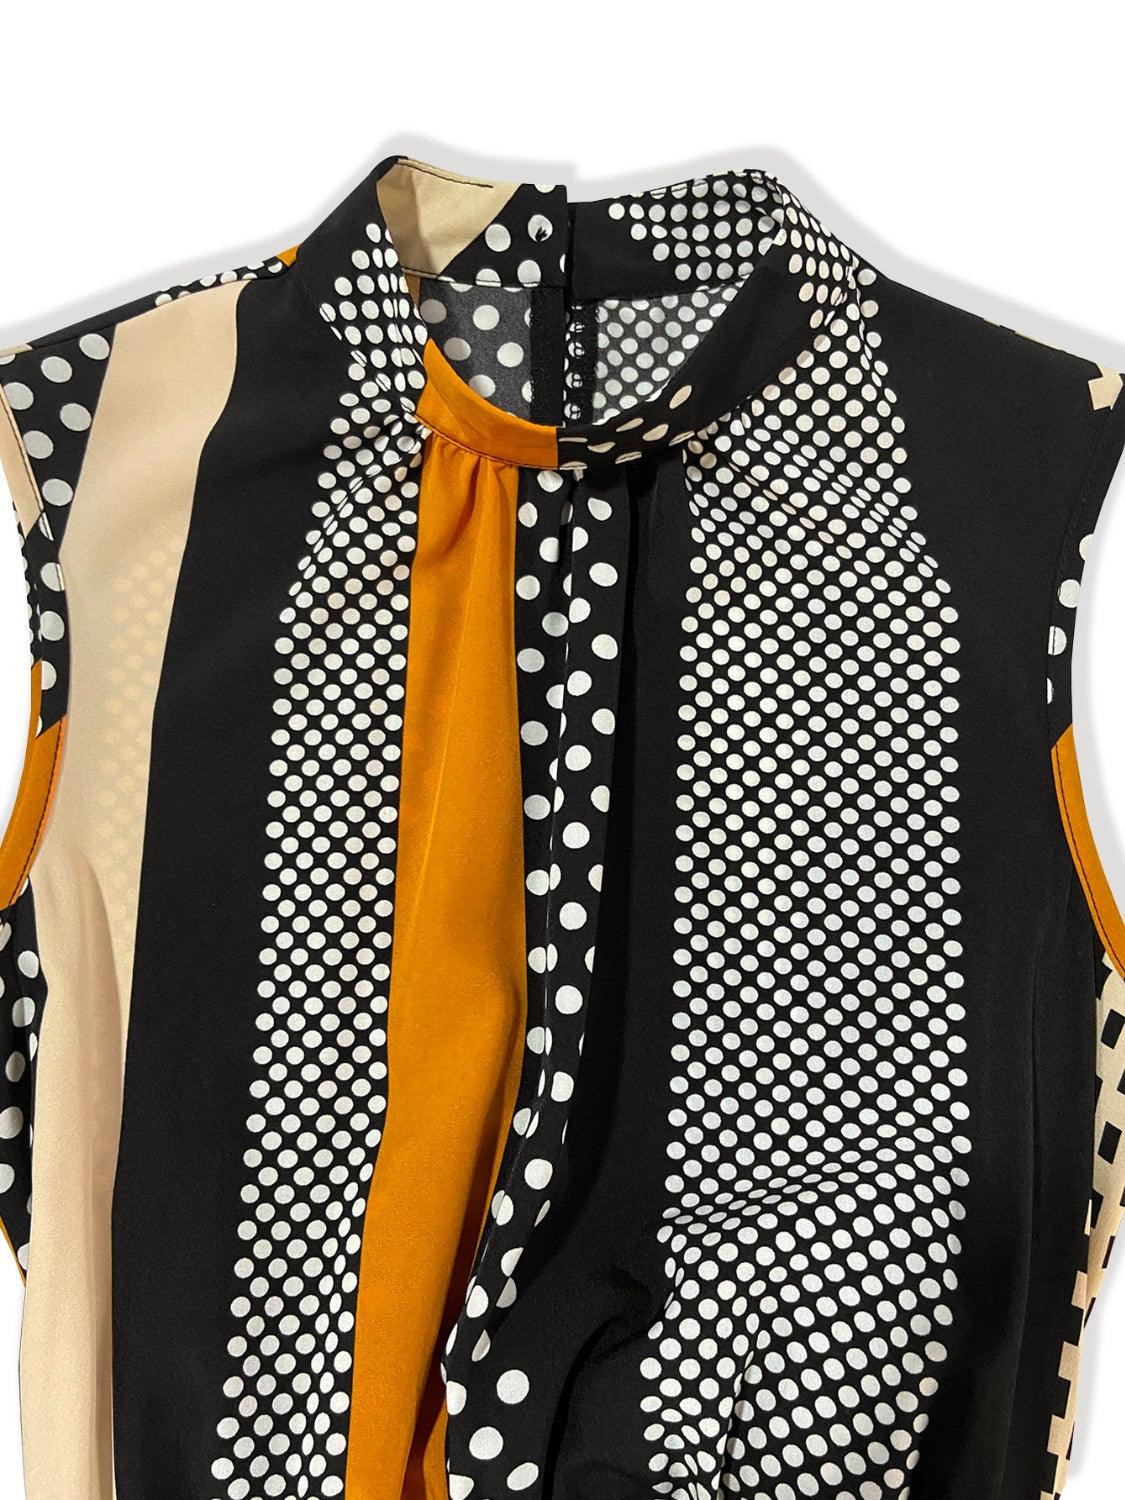 a black and white shirt with a yellow tie